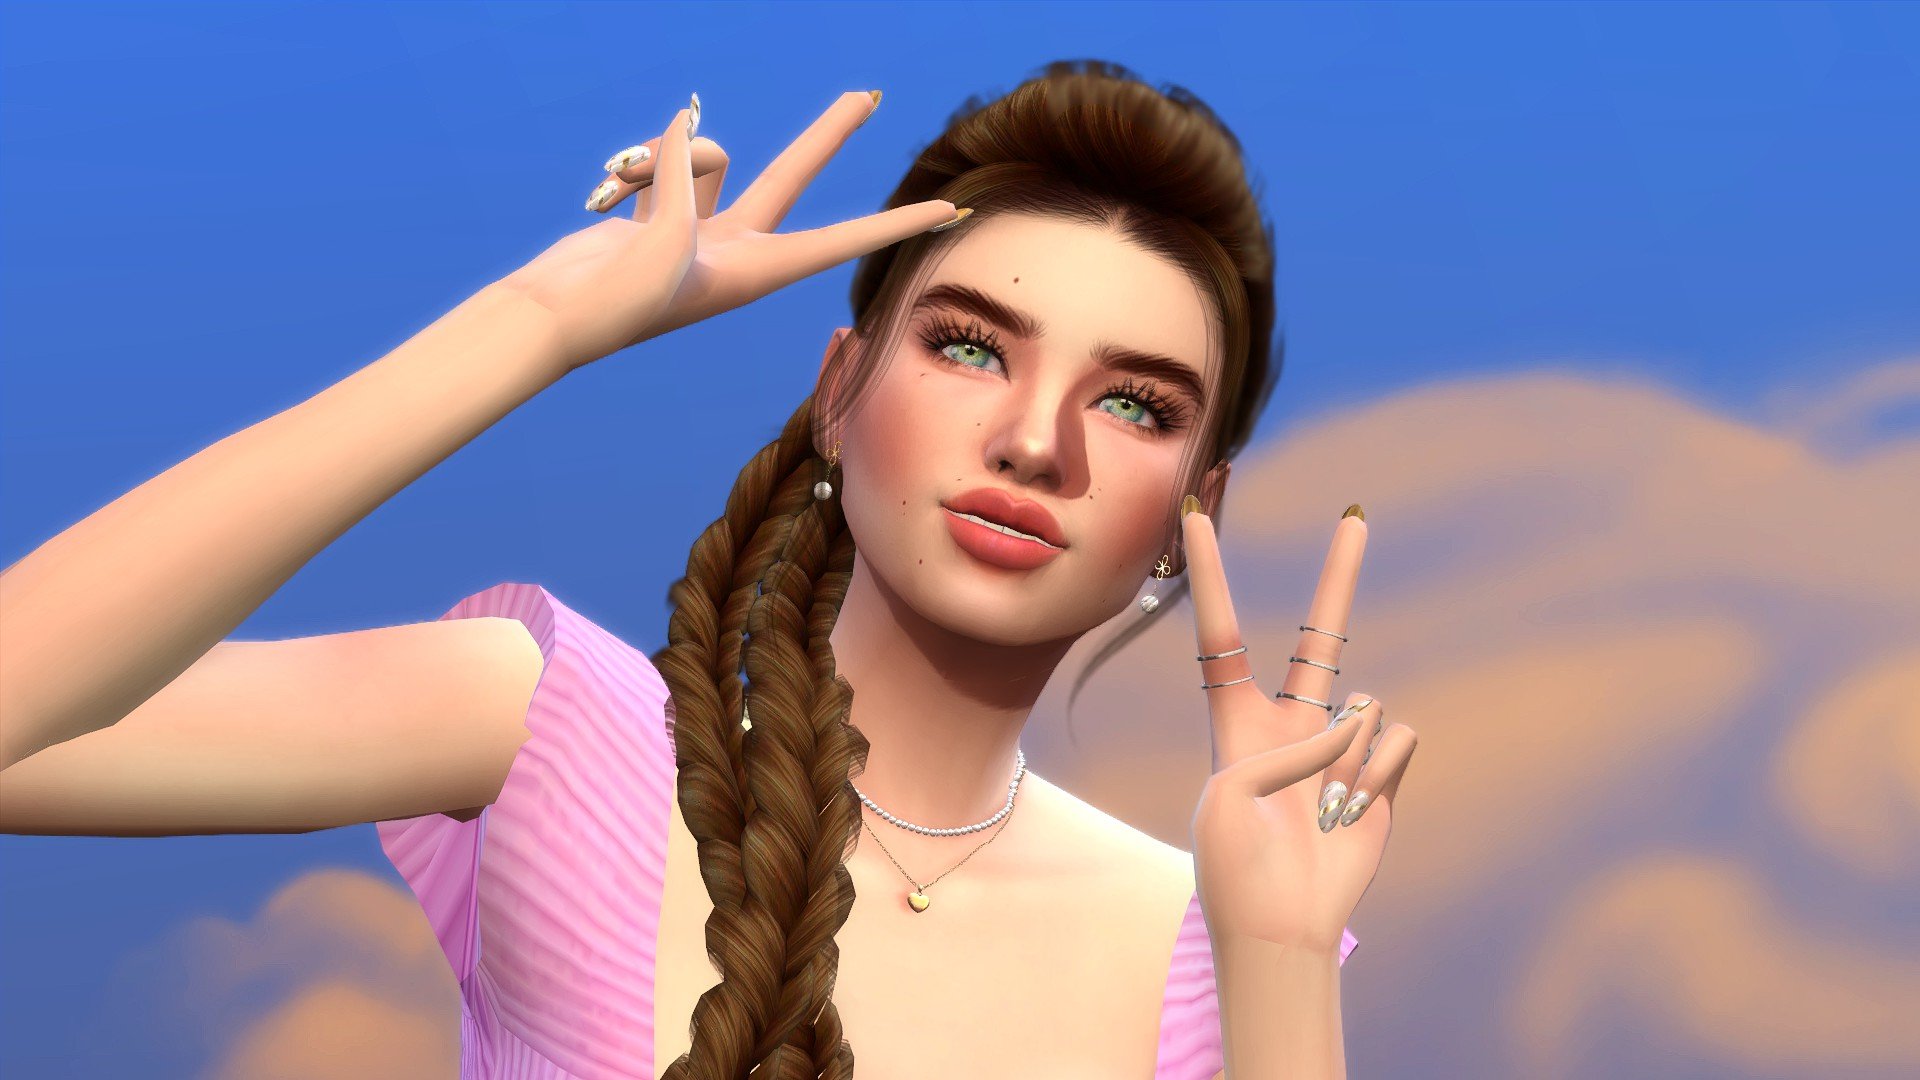 HQ Mod Make the Best Screenshots in Sims 4 — SNOOTYSIMS